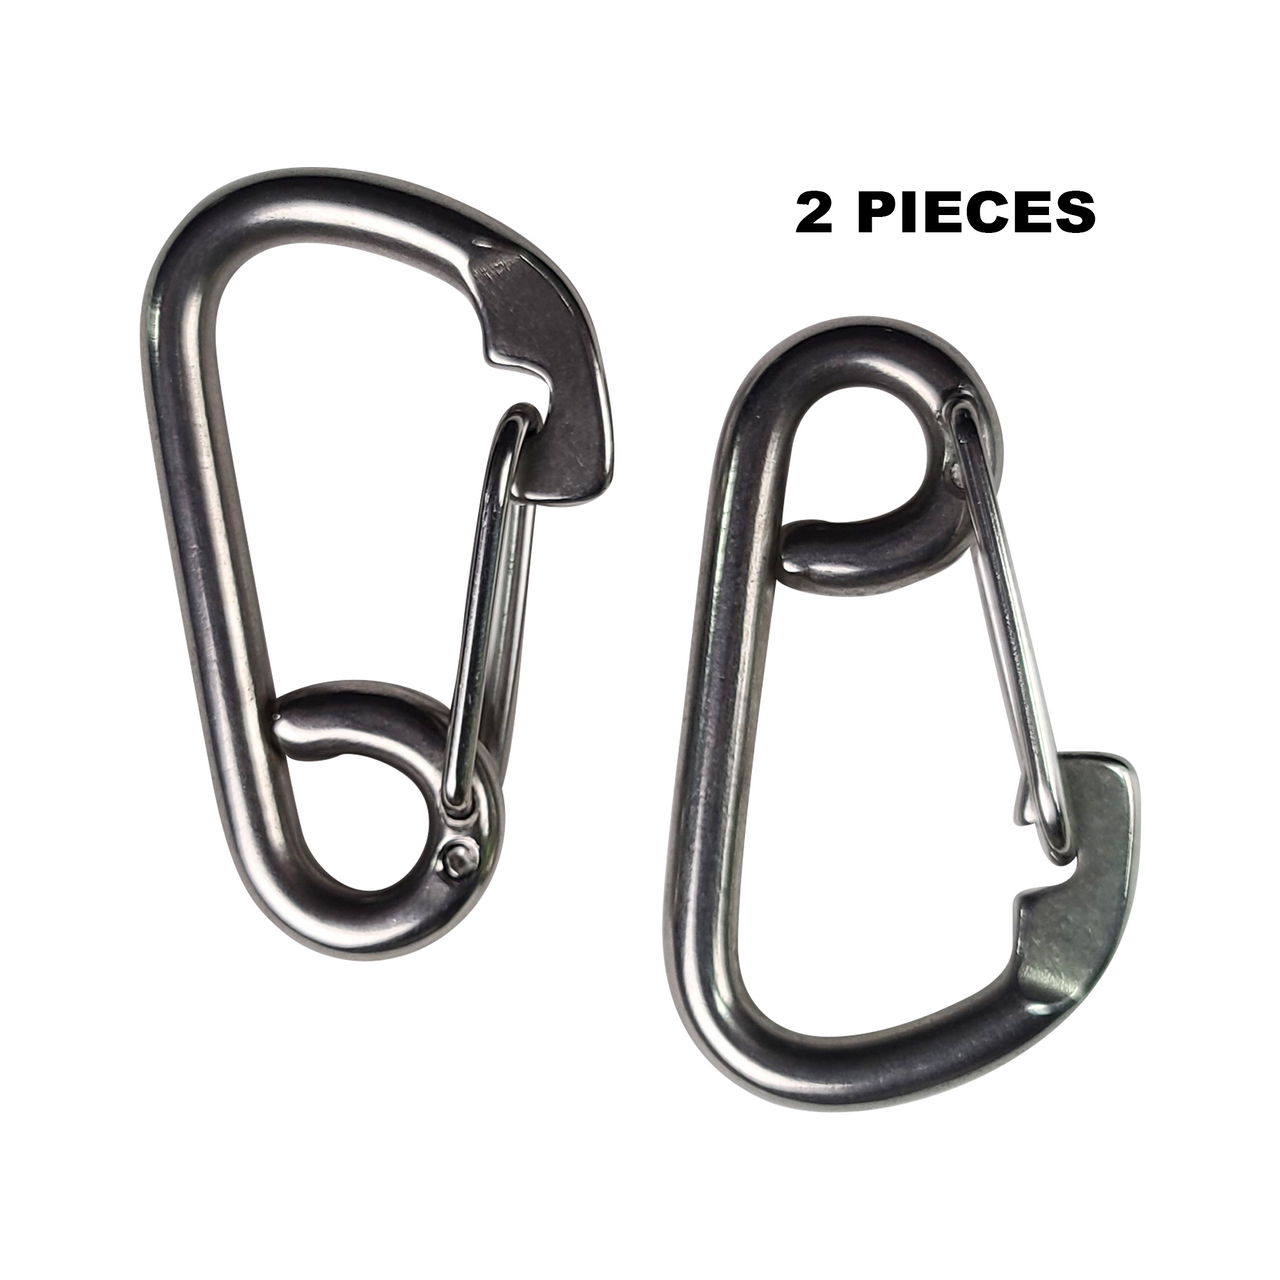 https://cdn11.bigcommerce.com/s-mricb0t1gp/images/stencil/1280x1280/products/278/1949/carabiner-clip-8mm-2pieces-sandsharkanchor-main-001__78625.1652458324.png?c=2?imbypass=on